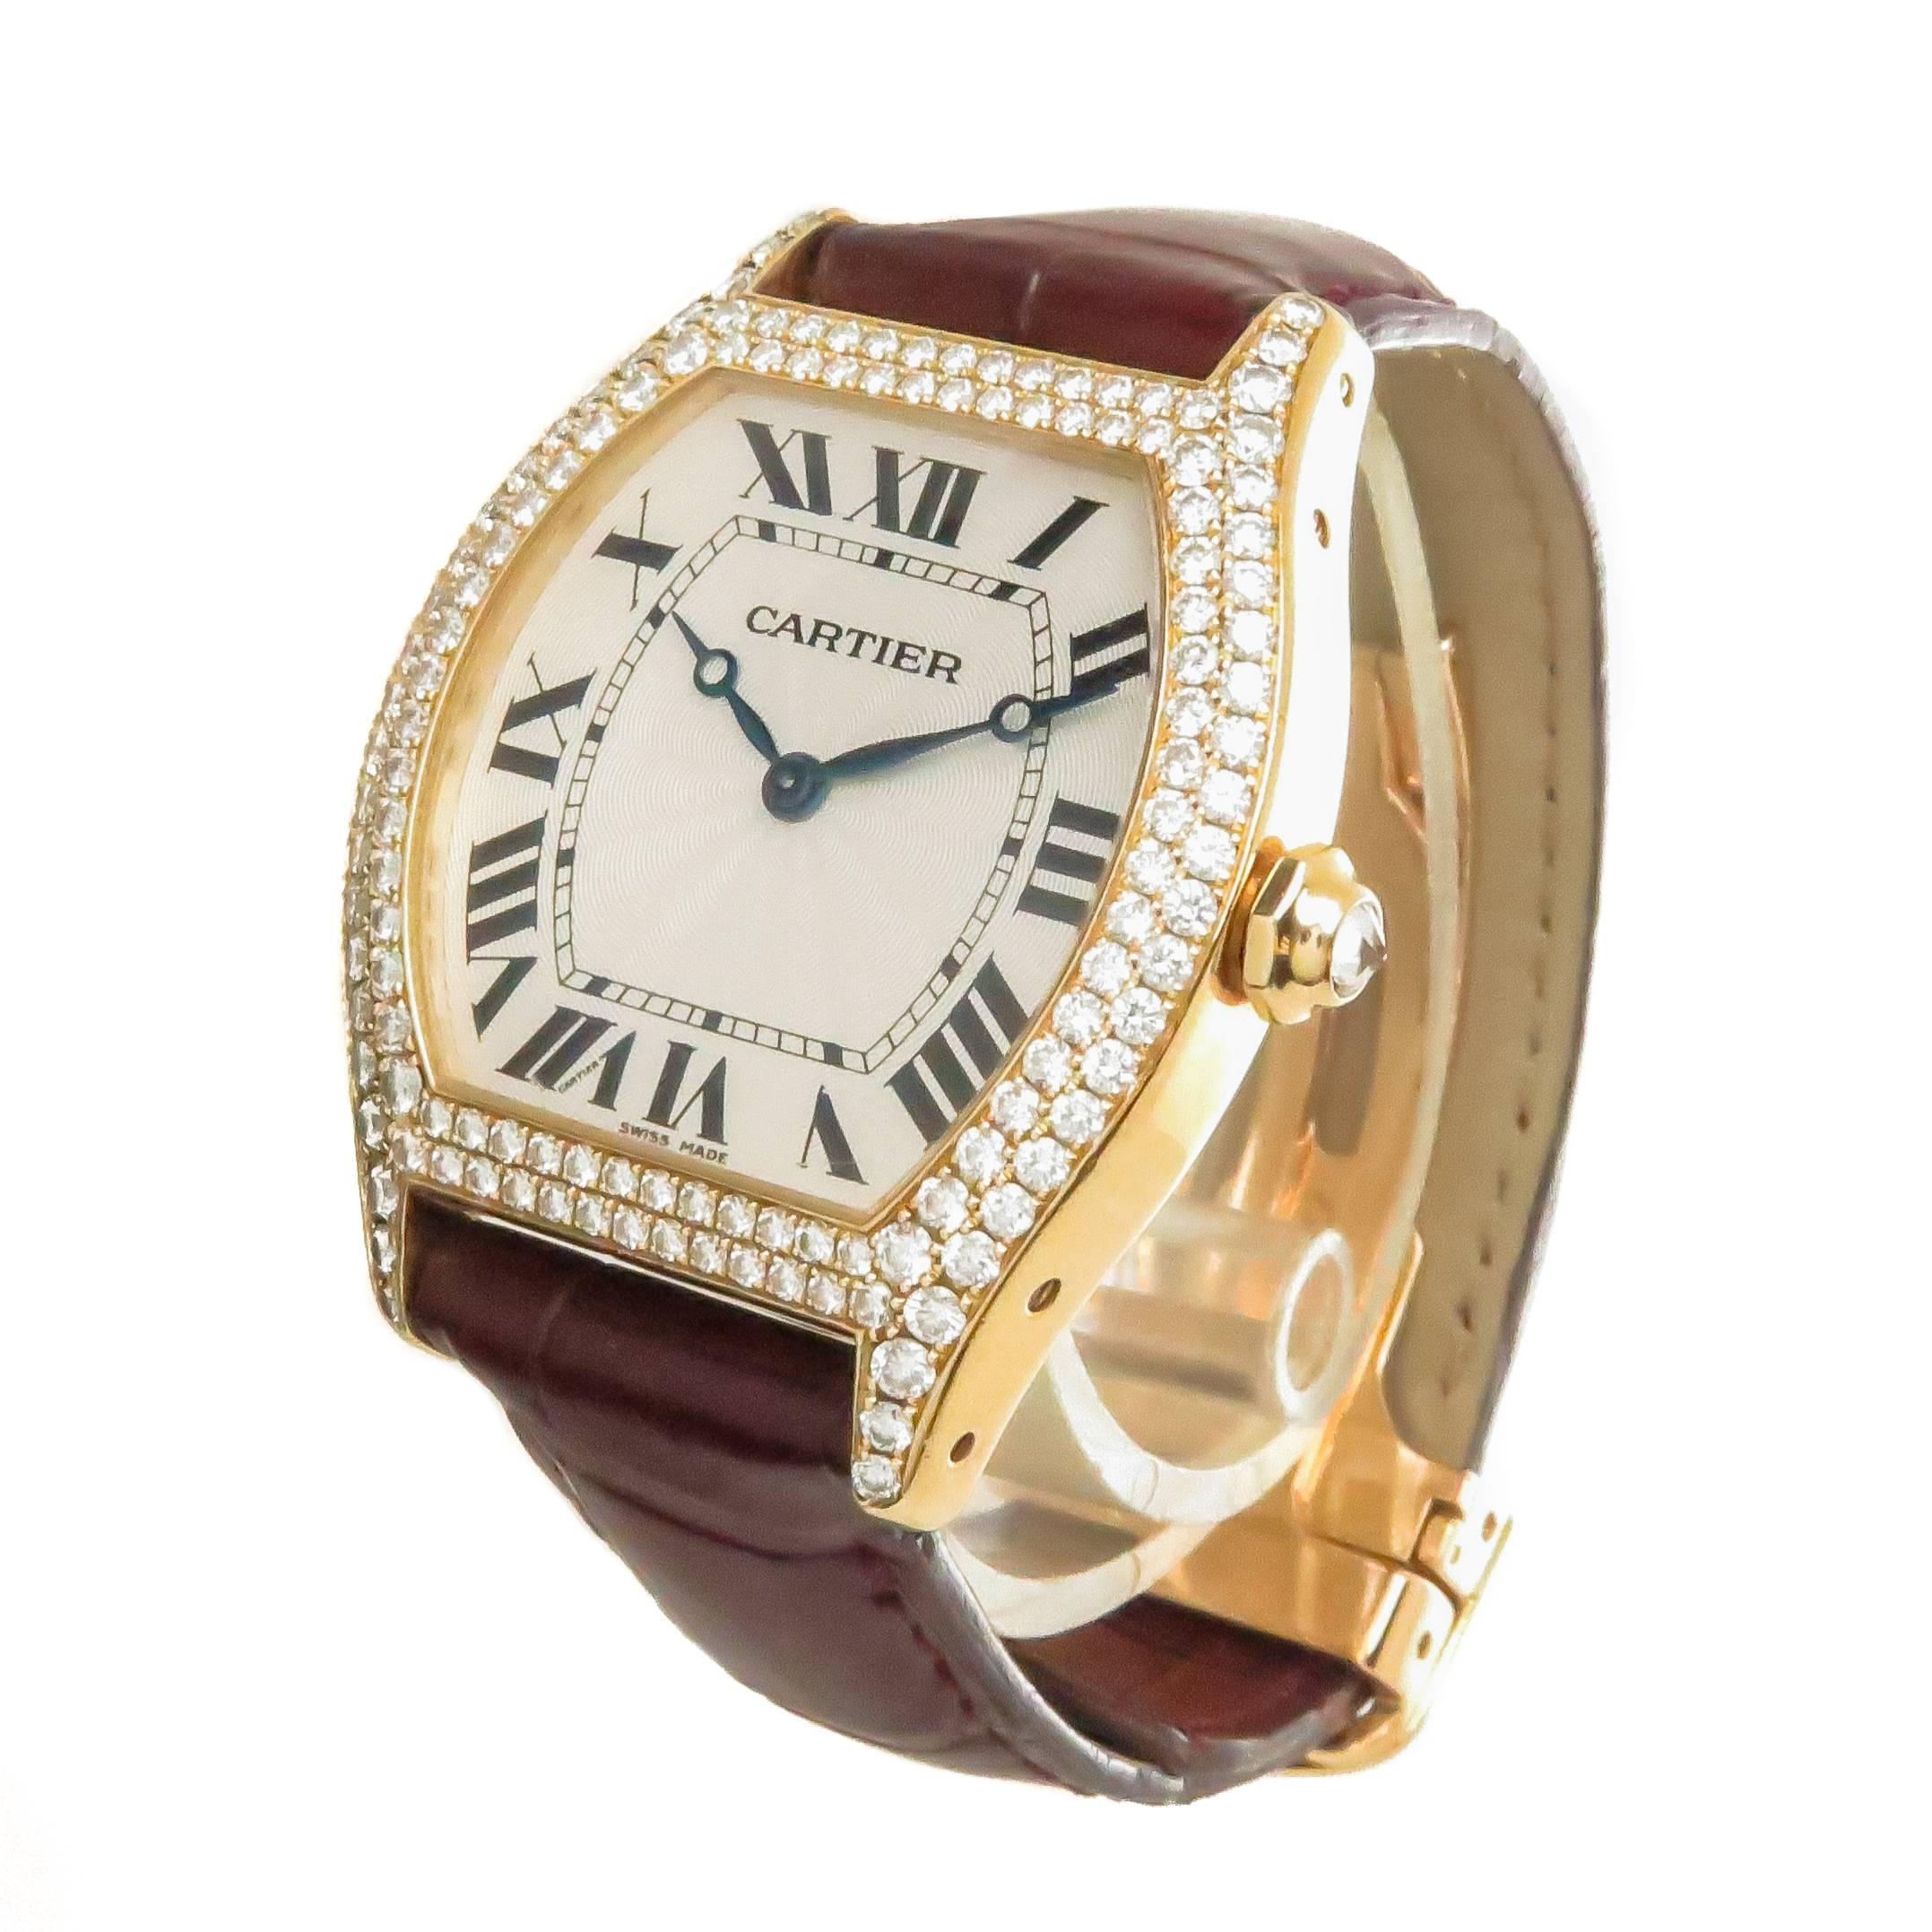 Circa 2009 Cartier Tortue Collection Reference 2496 Wrist Watch,  43 X 34 MM 18K Yellow Gold Water Resistant Case with see through Exhibition back. Double Row Diamond set Bezel totaling approximately 3 carats and a Diamond set Crown. Mechanical,